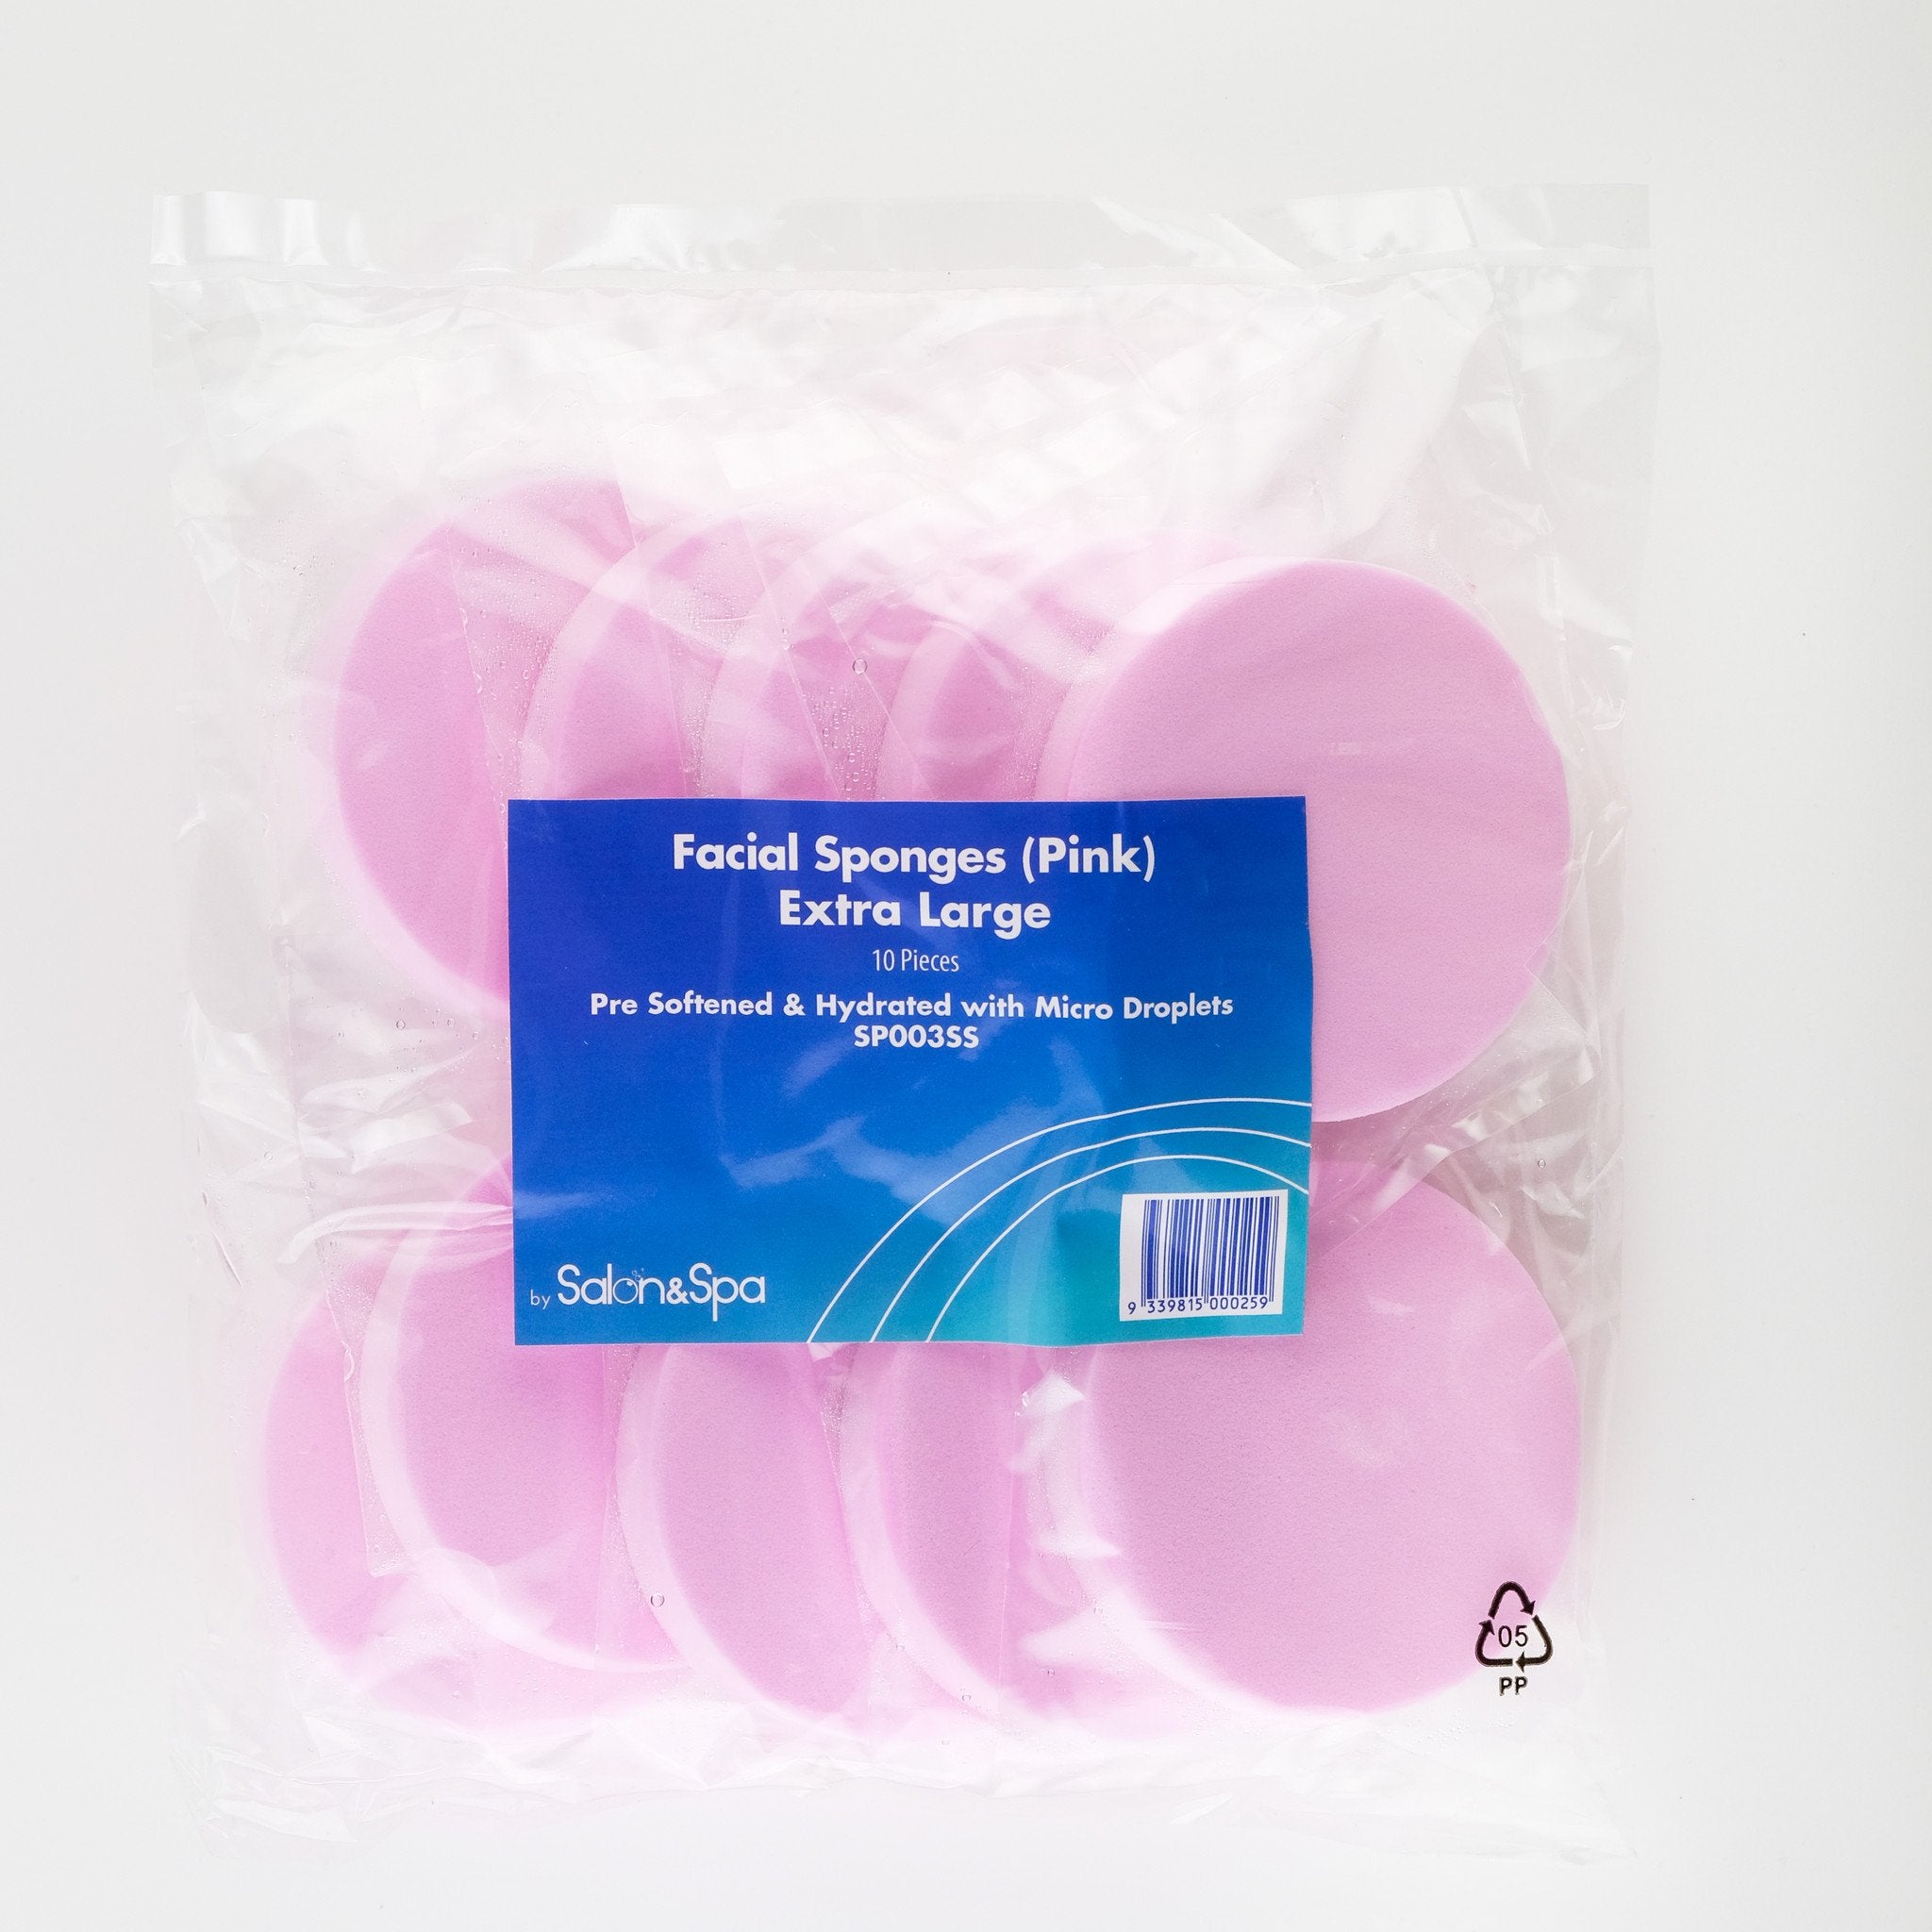 Salon & Spa FACIAL SPONGES PINK Extra large & Thick Micro Hydrated 10pk